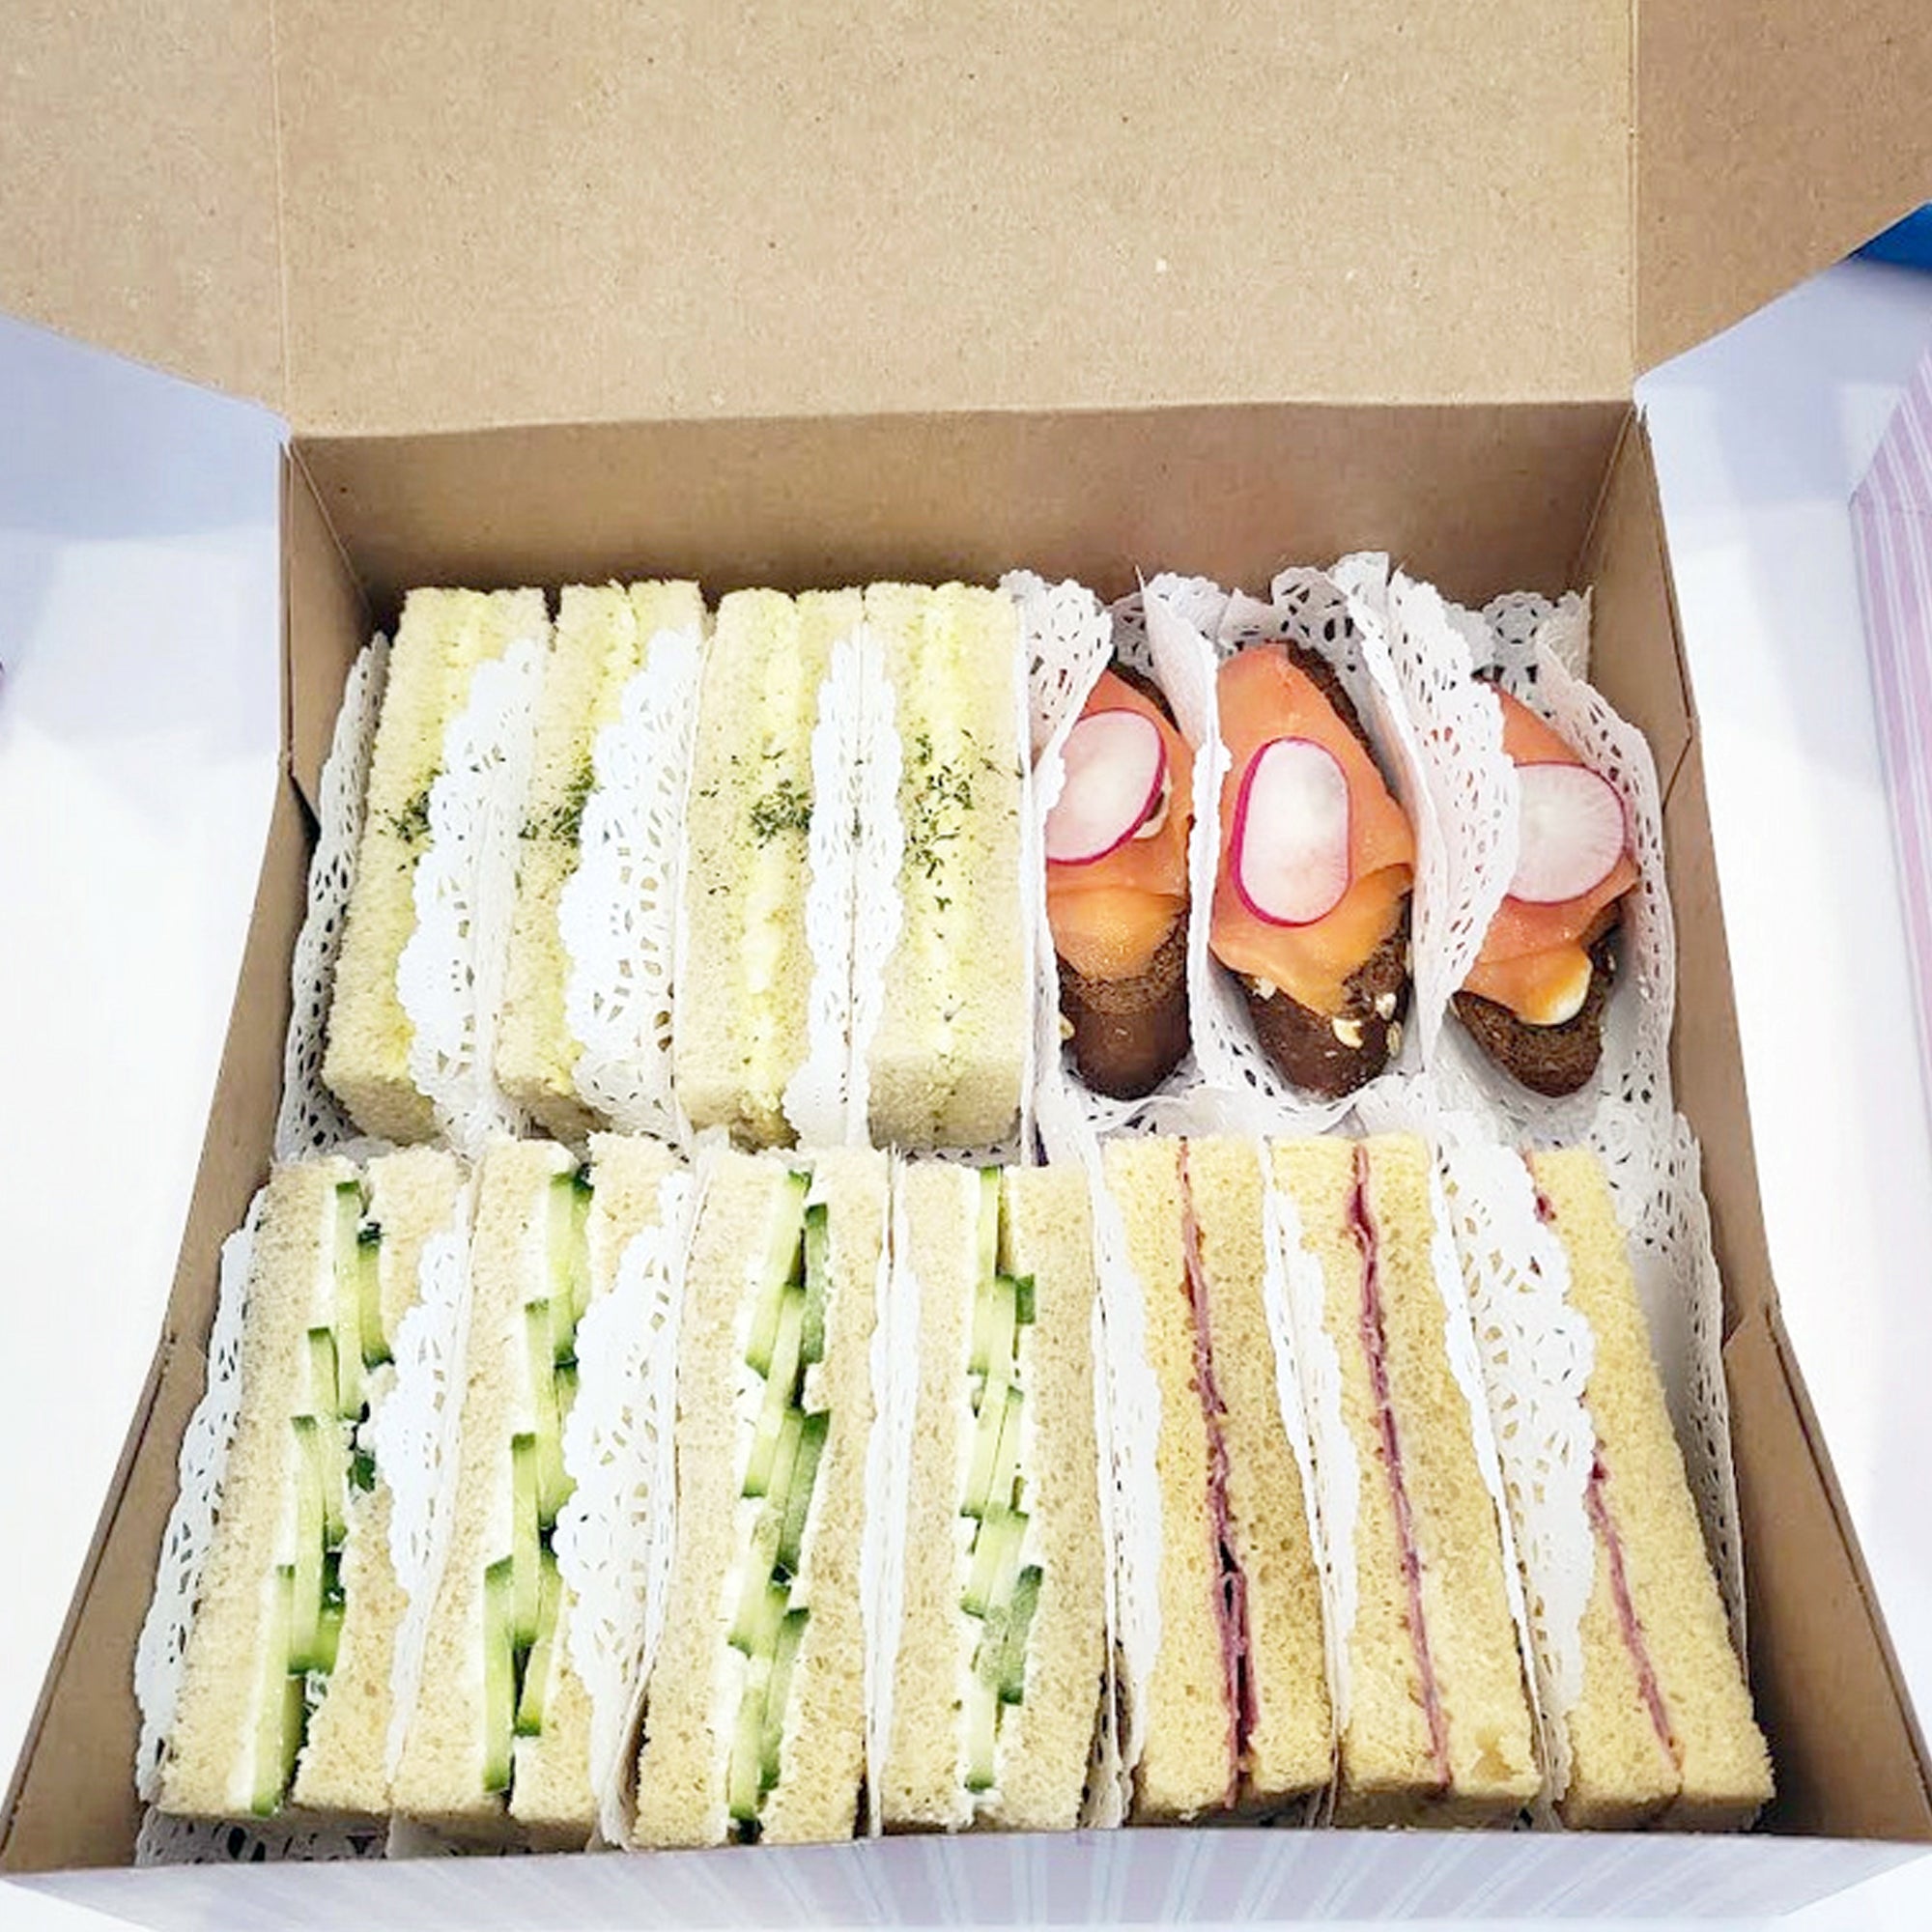 Tea Sandwiches Catering Box (Pick-Up)